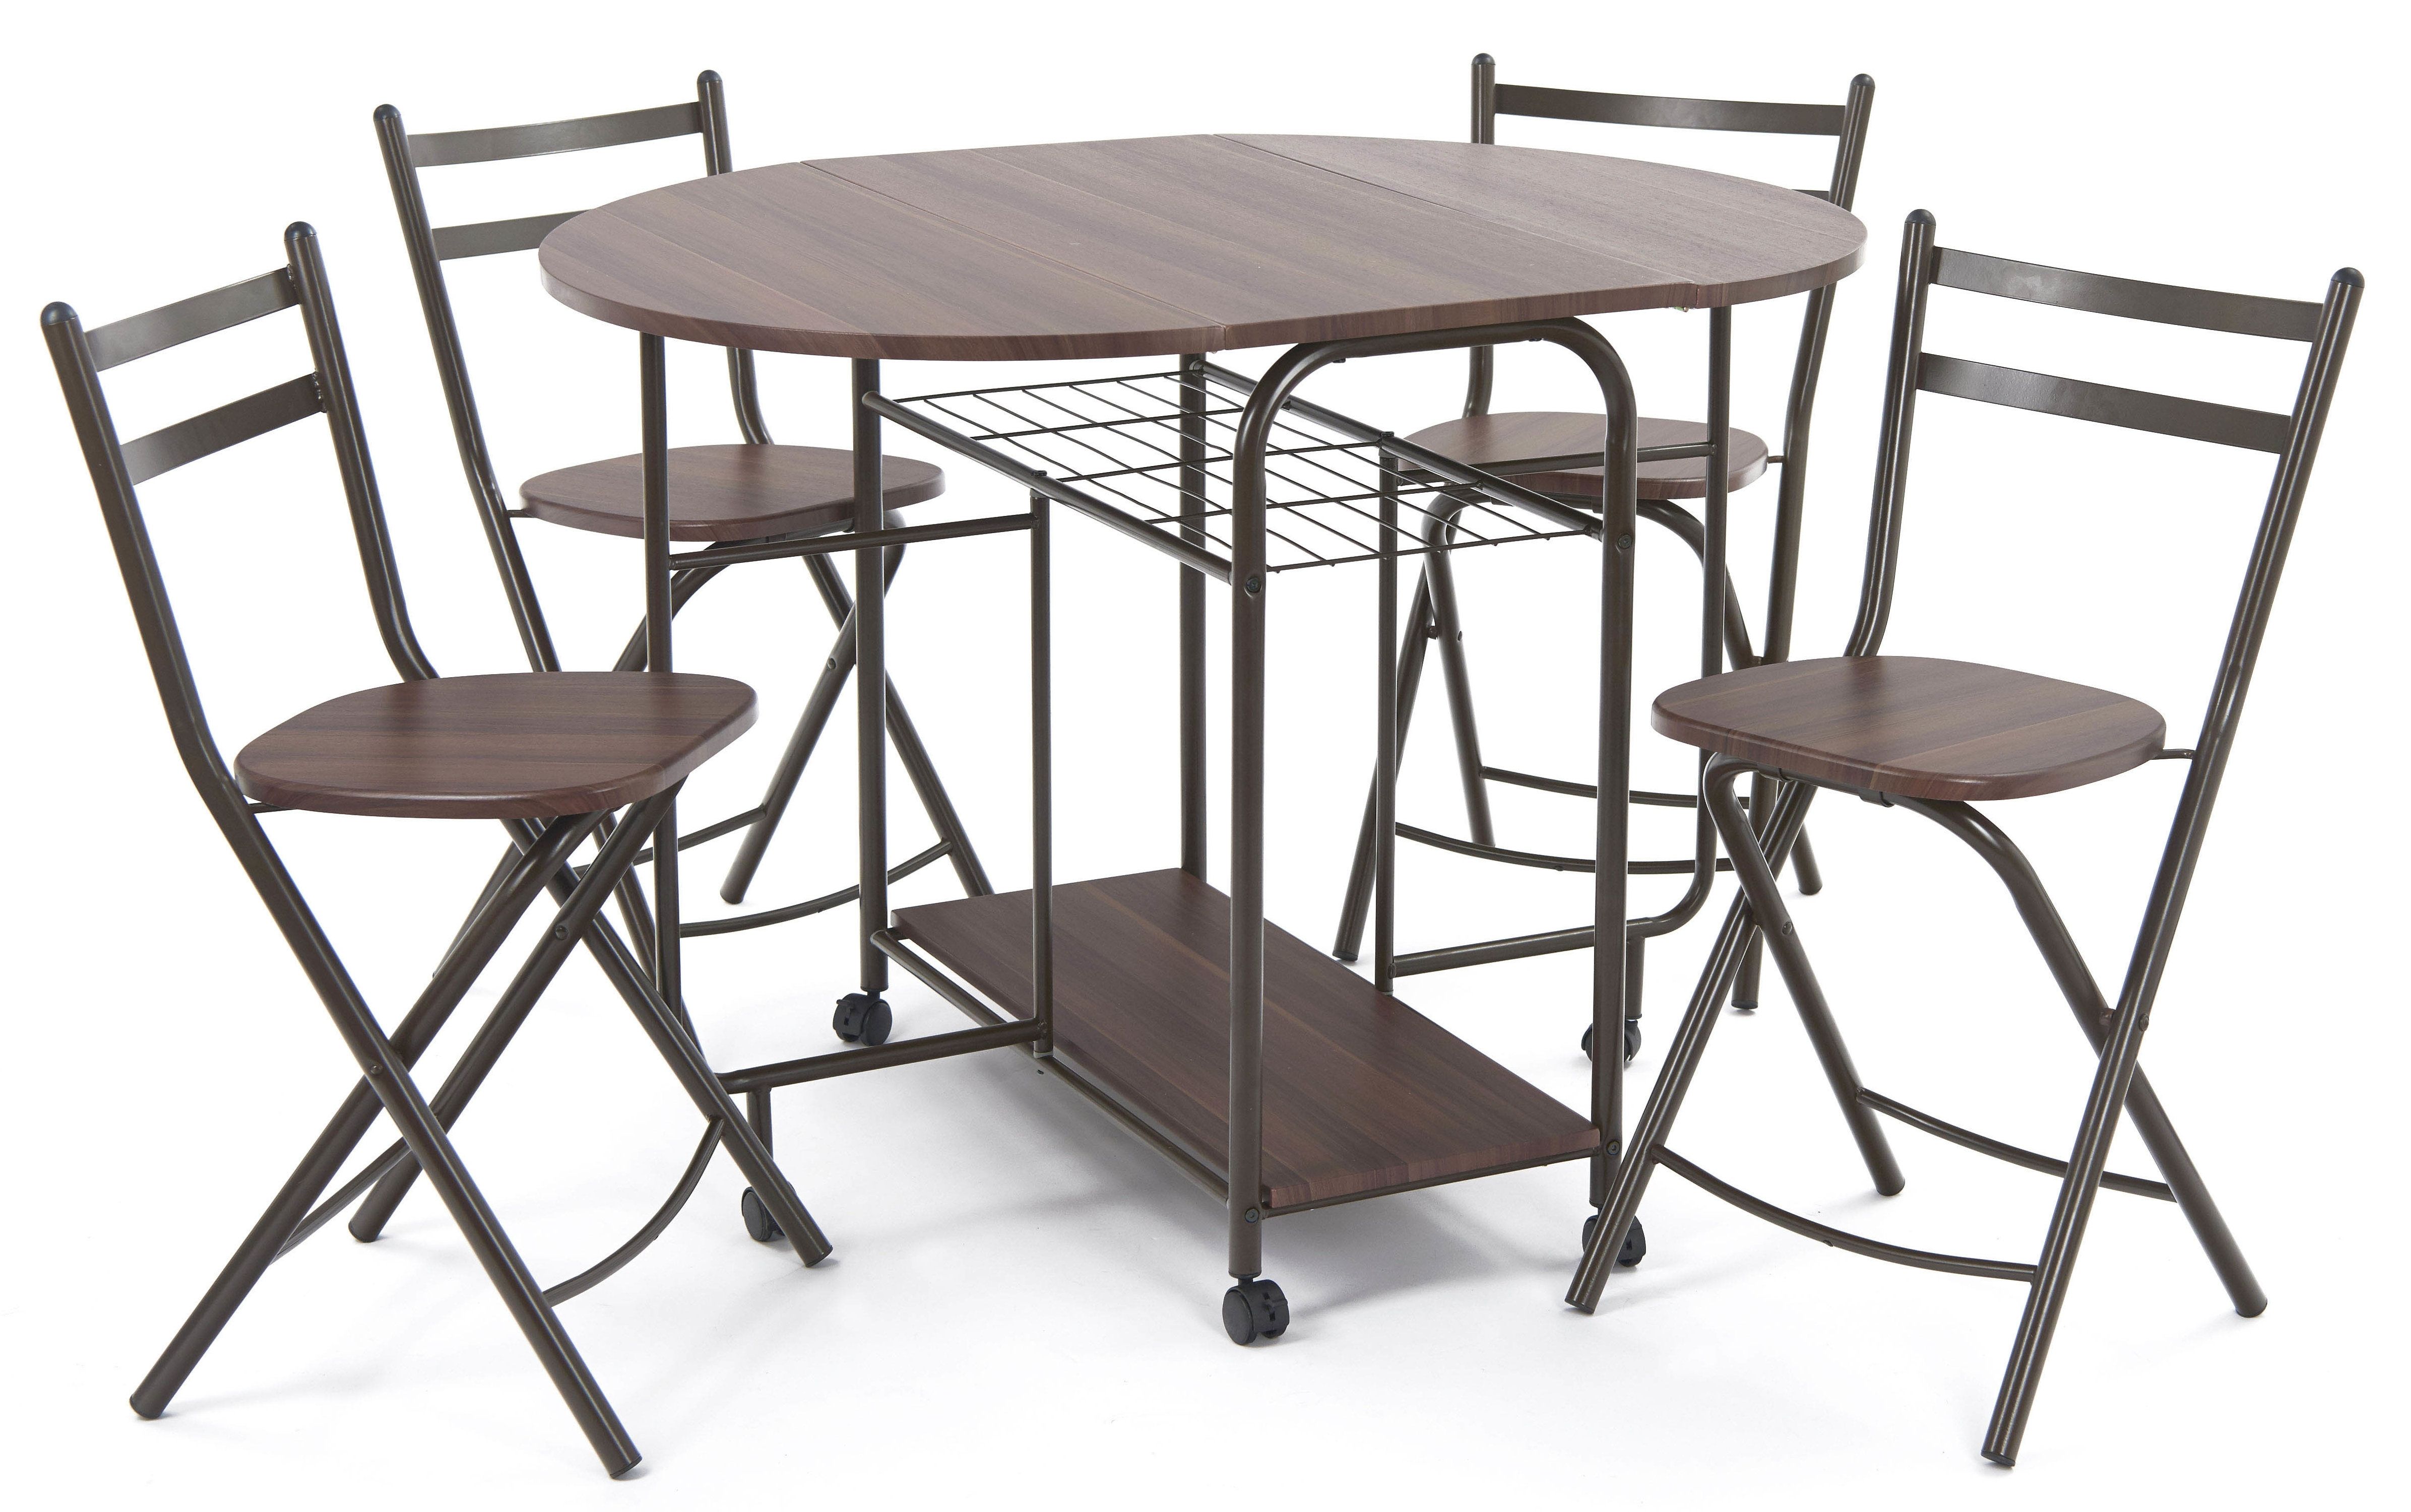 Trendy Stowaway Dining Tables And Chairs Regarding Gablemere Stowaway Dining Table And 4 Chairs (View 16 of 25)